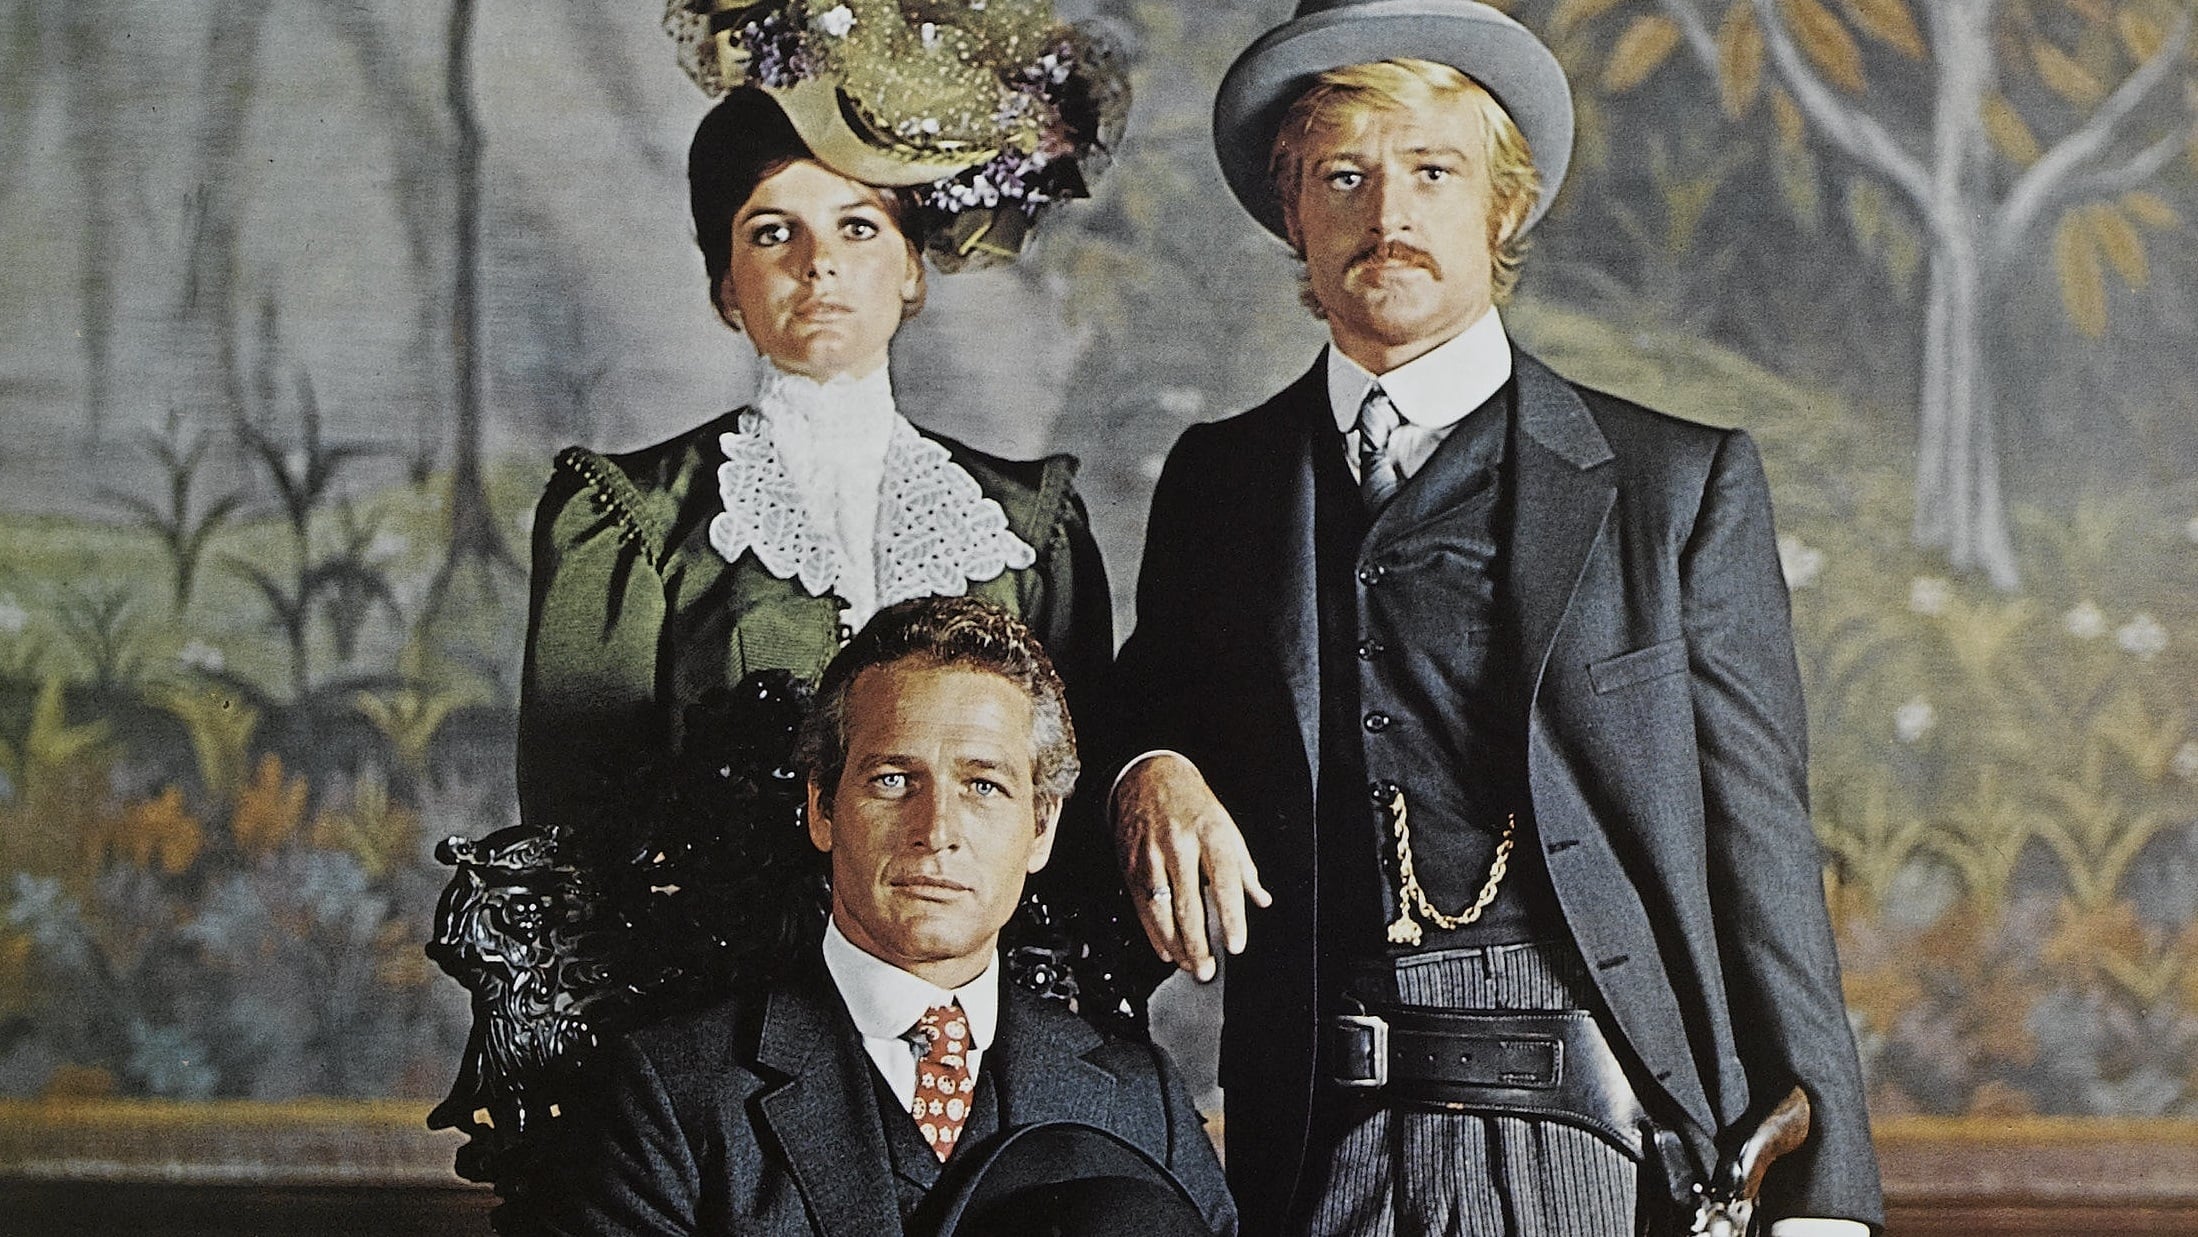 Butch Cassidy and the Sundance Kid 1969 Soap2Day